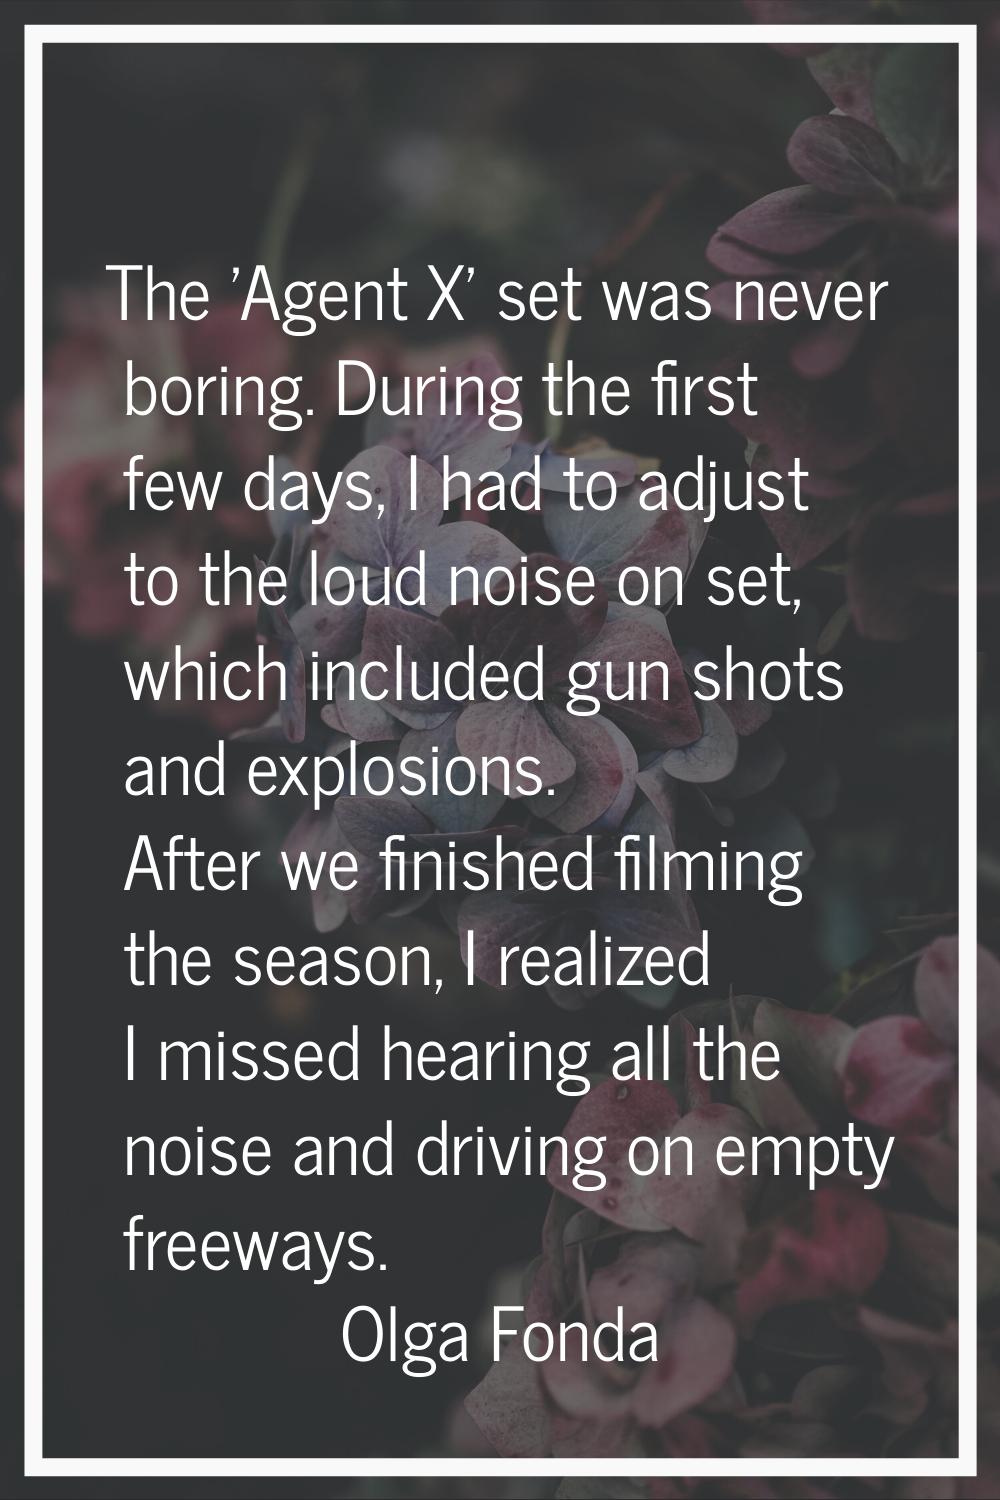 The 'Agent X' set was never boring. During the first few days, I had to adjust to the loud noise on